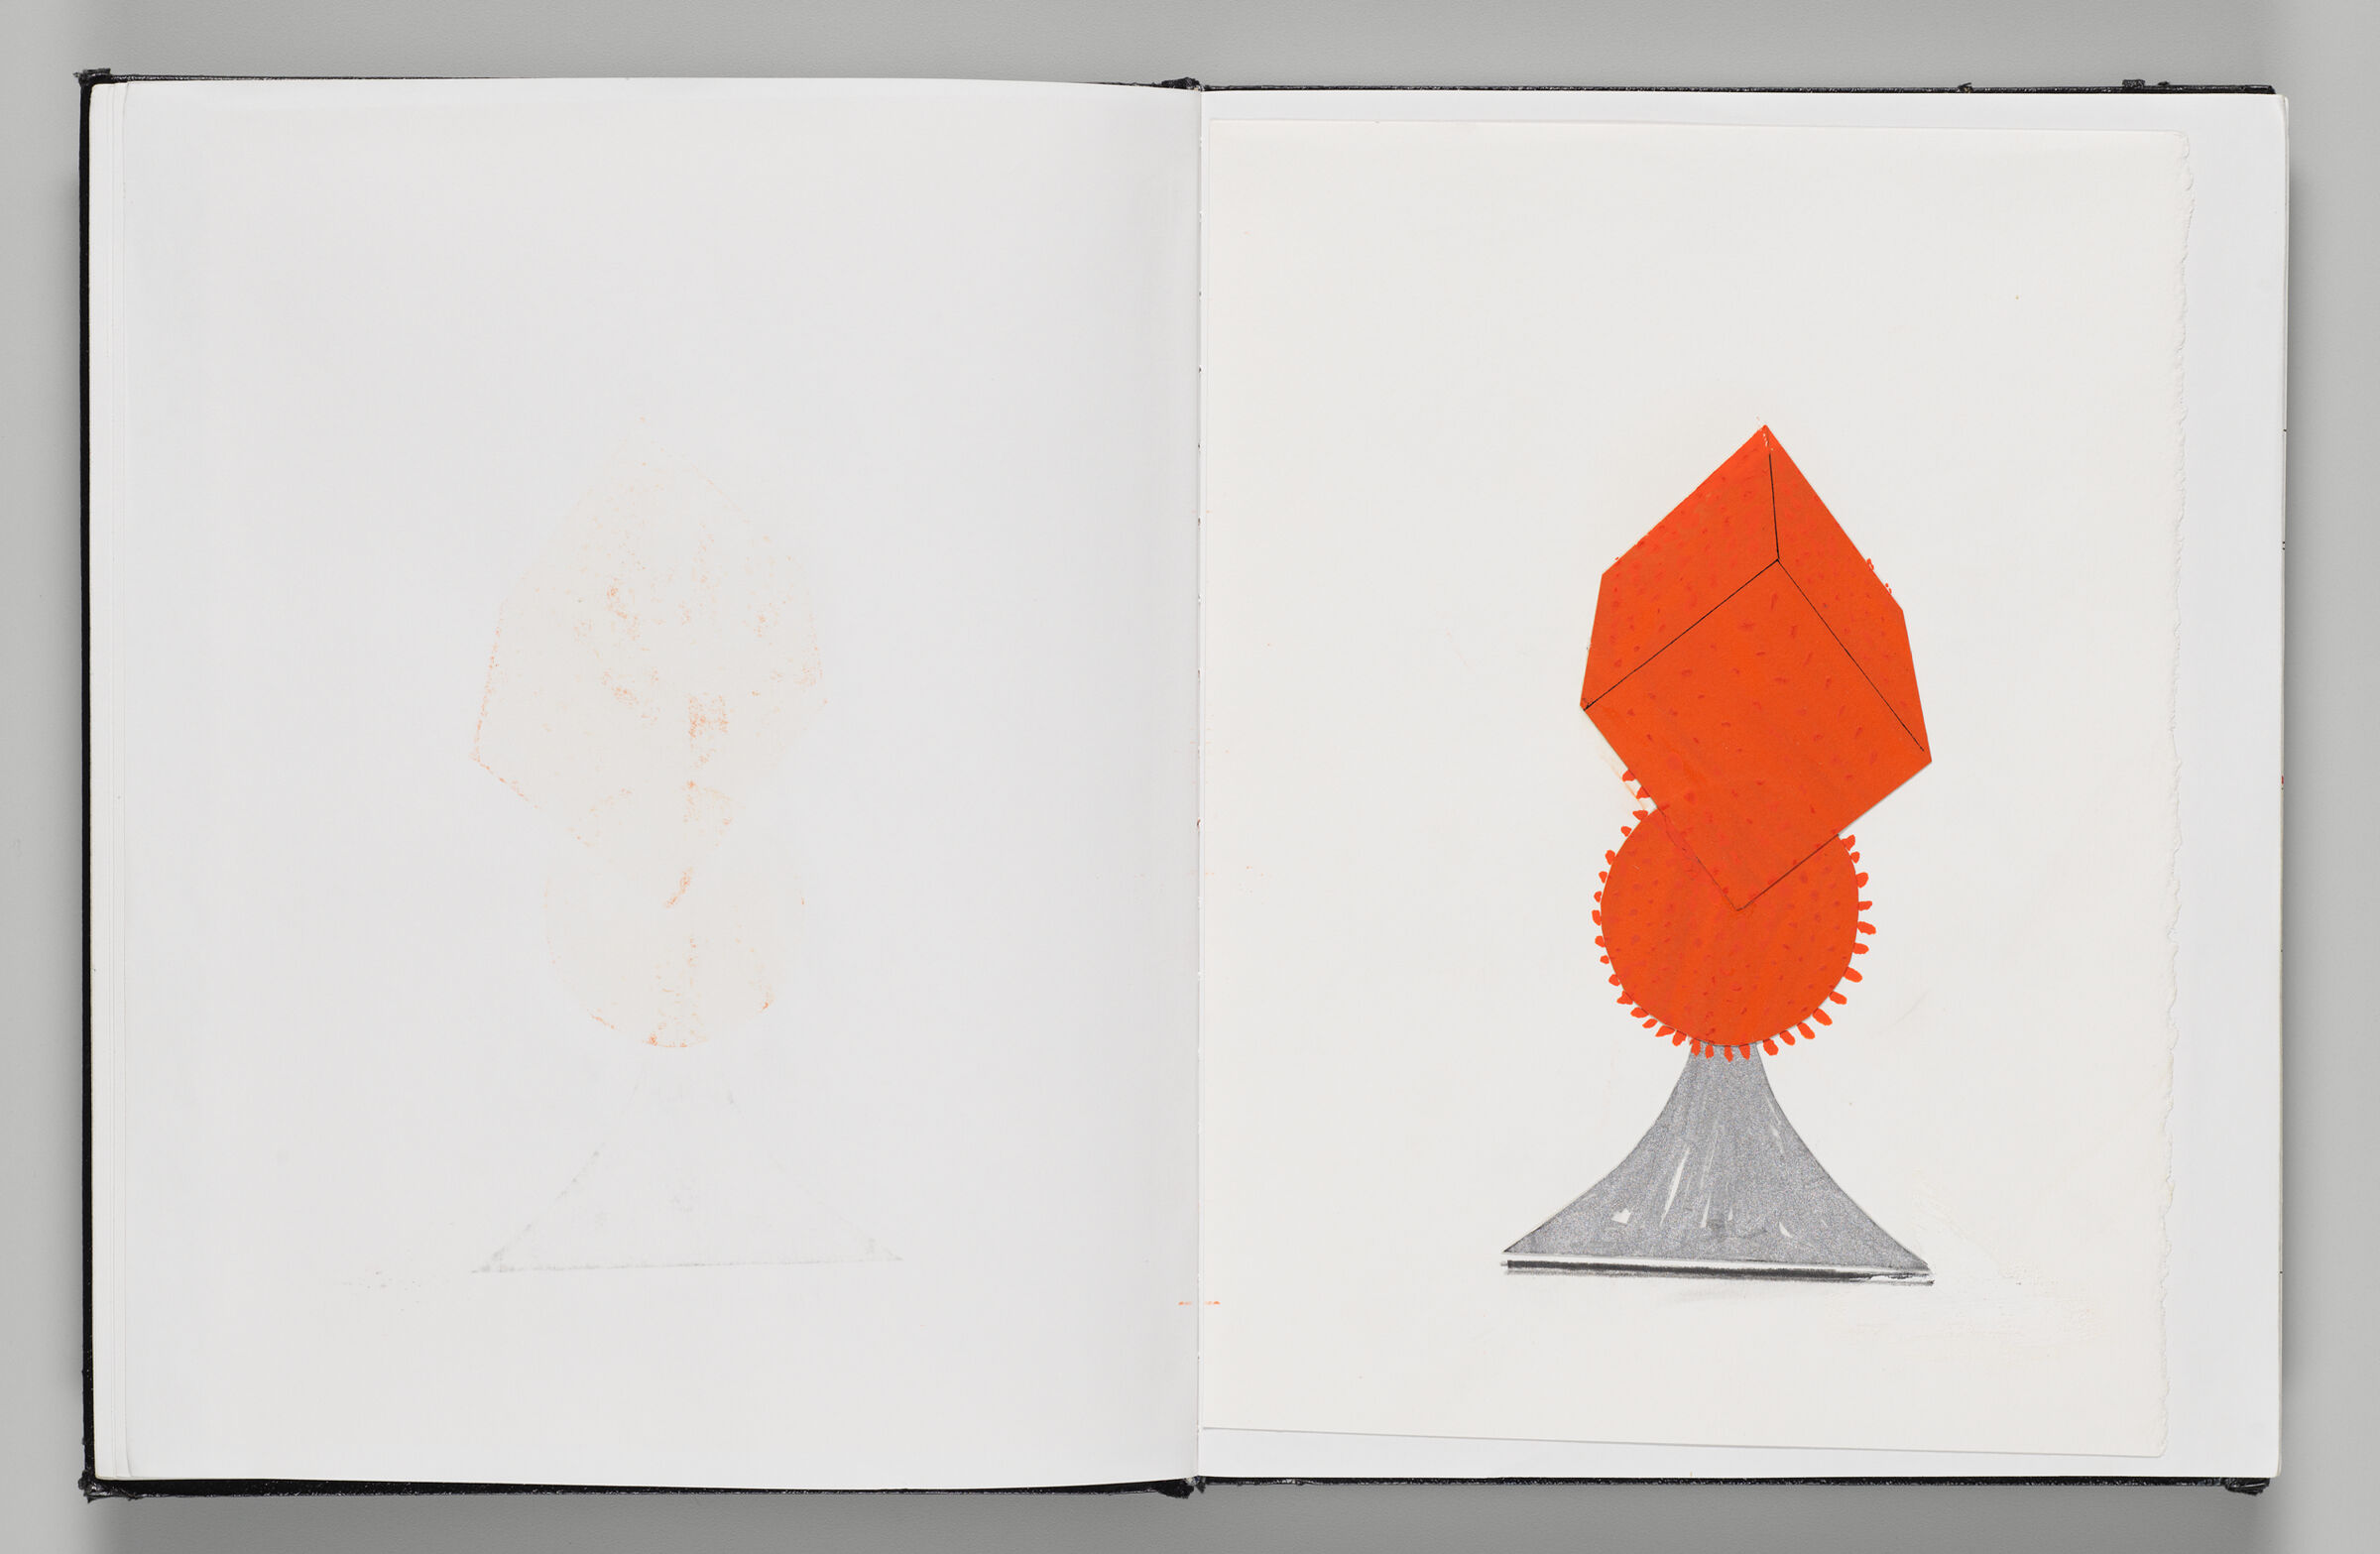 Untitled (Blank, Left Page); Untitled (Adhered Collage Of Neon Sculpture, Right Page)